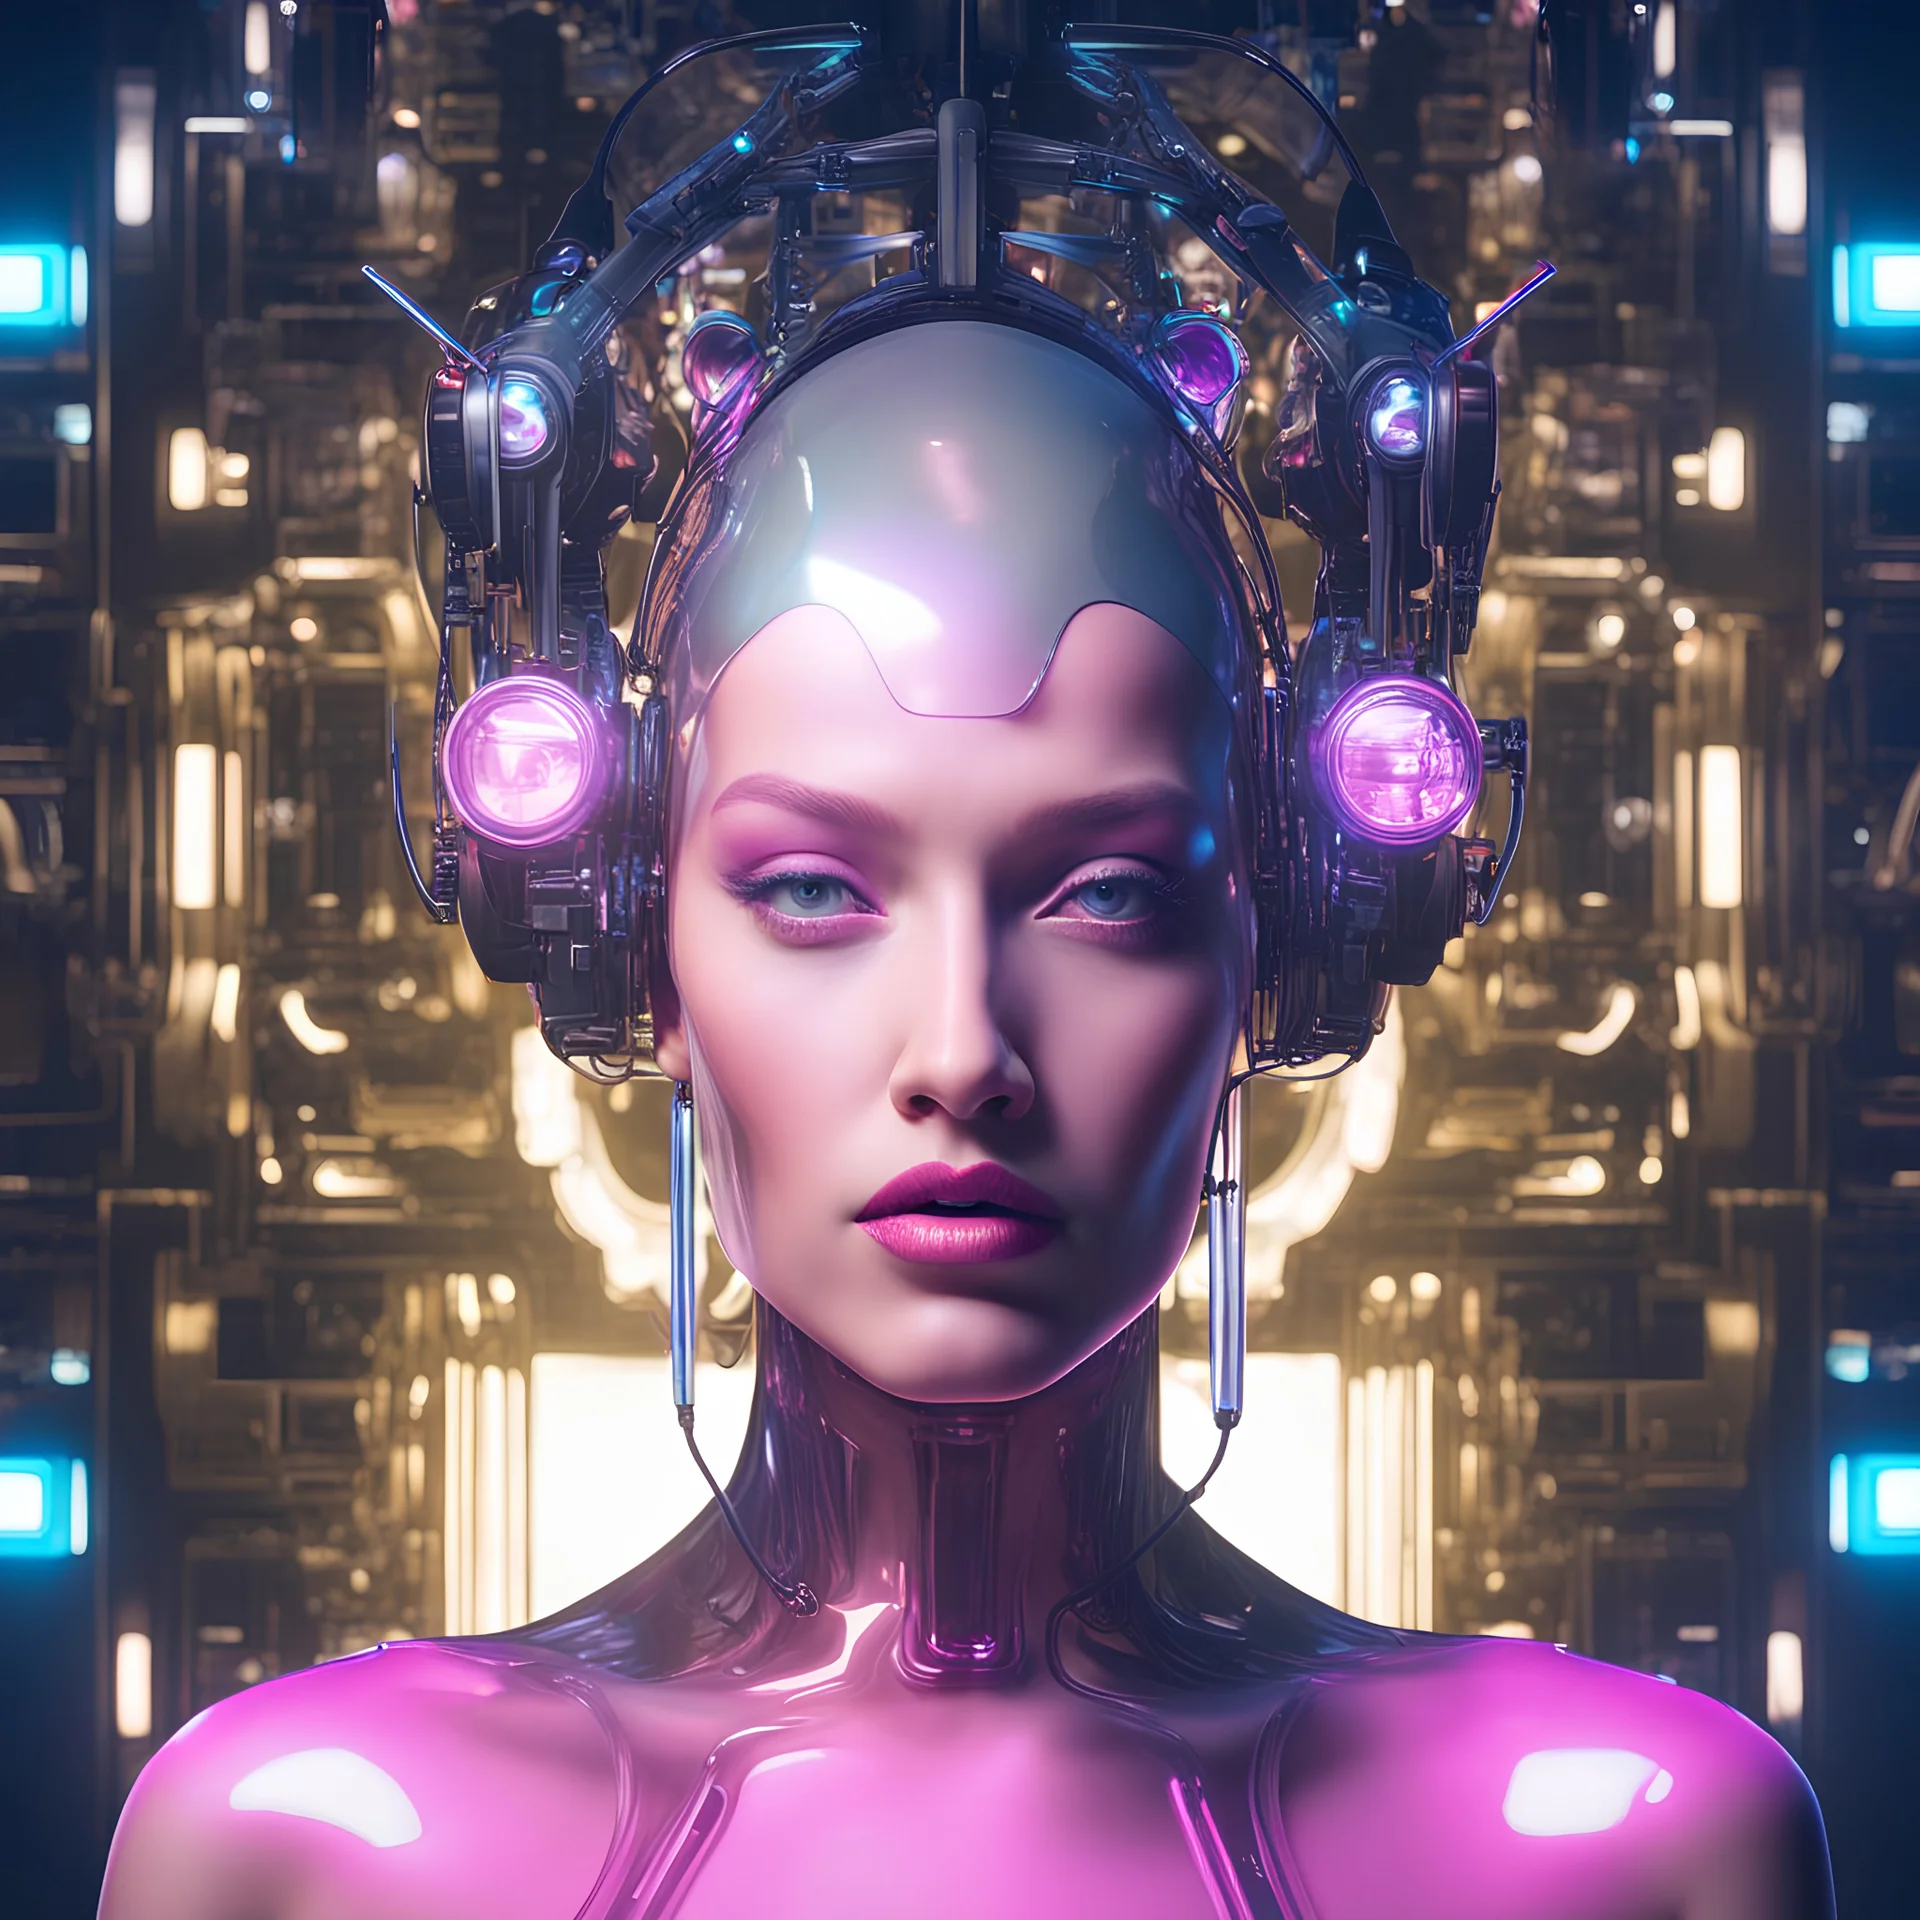 Organic sara, cyborg Ai queen with neuralink headgear, on an inter dimensional catwalk, half perfect human face, clear acrylic plastic film, full body shot, catwalk fashion show, iridescent, surreal, Salvador Dali meets pixels, aaymin,waterhead, is the name, dj style, neon pink,glowing eyes,music playing